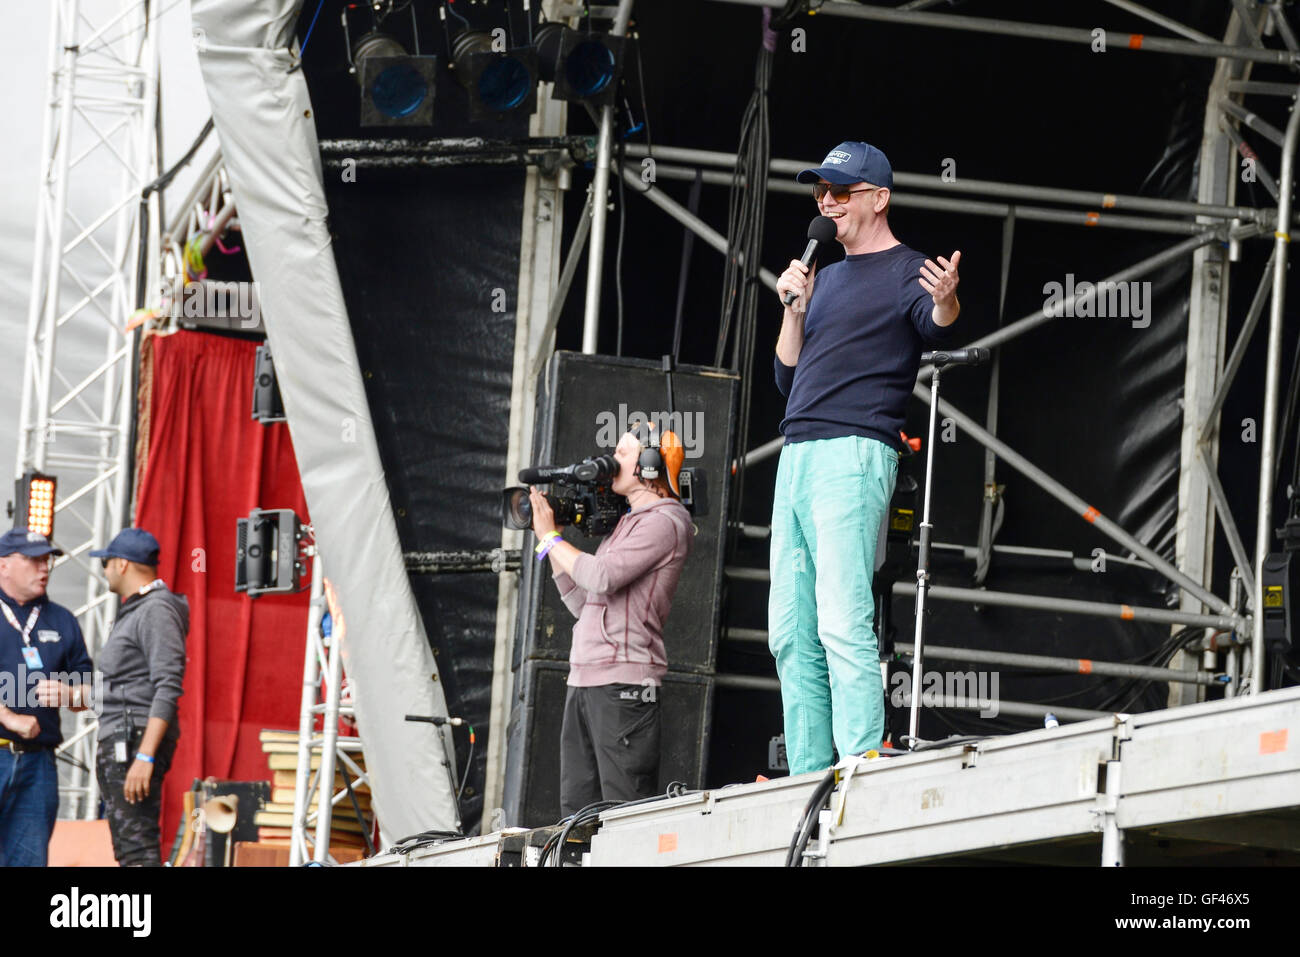 Bolesworth, Cheshire, UK. 29th July 2016. Chris Evans introducing Texas to the Main stage. The event is the brainchild of Chris Evans and features 3 days of cars, music and entertainment with profits being donated to the charity Children in Need. Credit:  Andrew Paterson/Alamy Live News Stock Photo